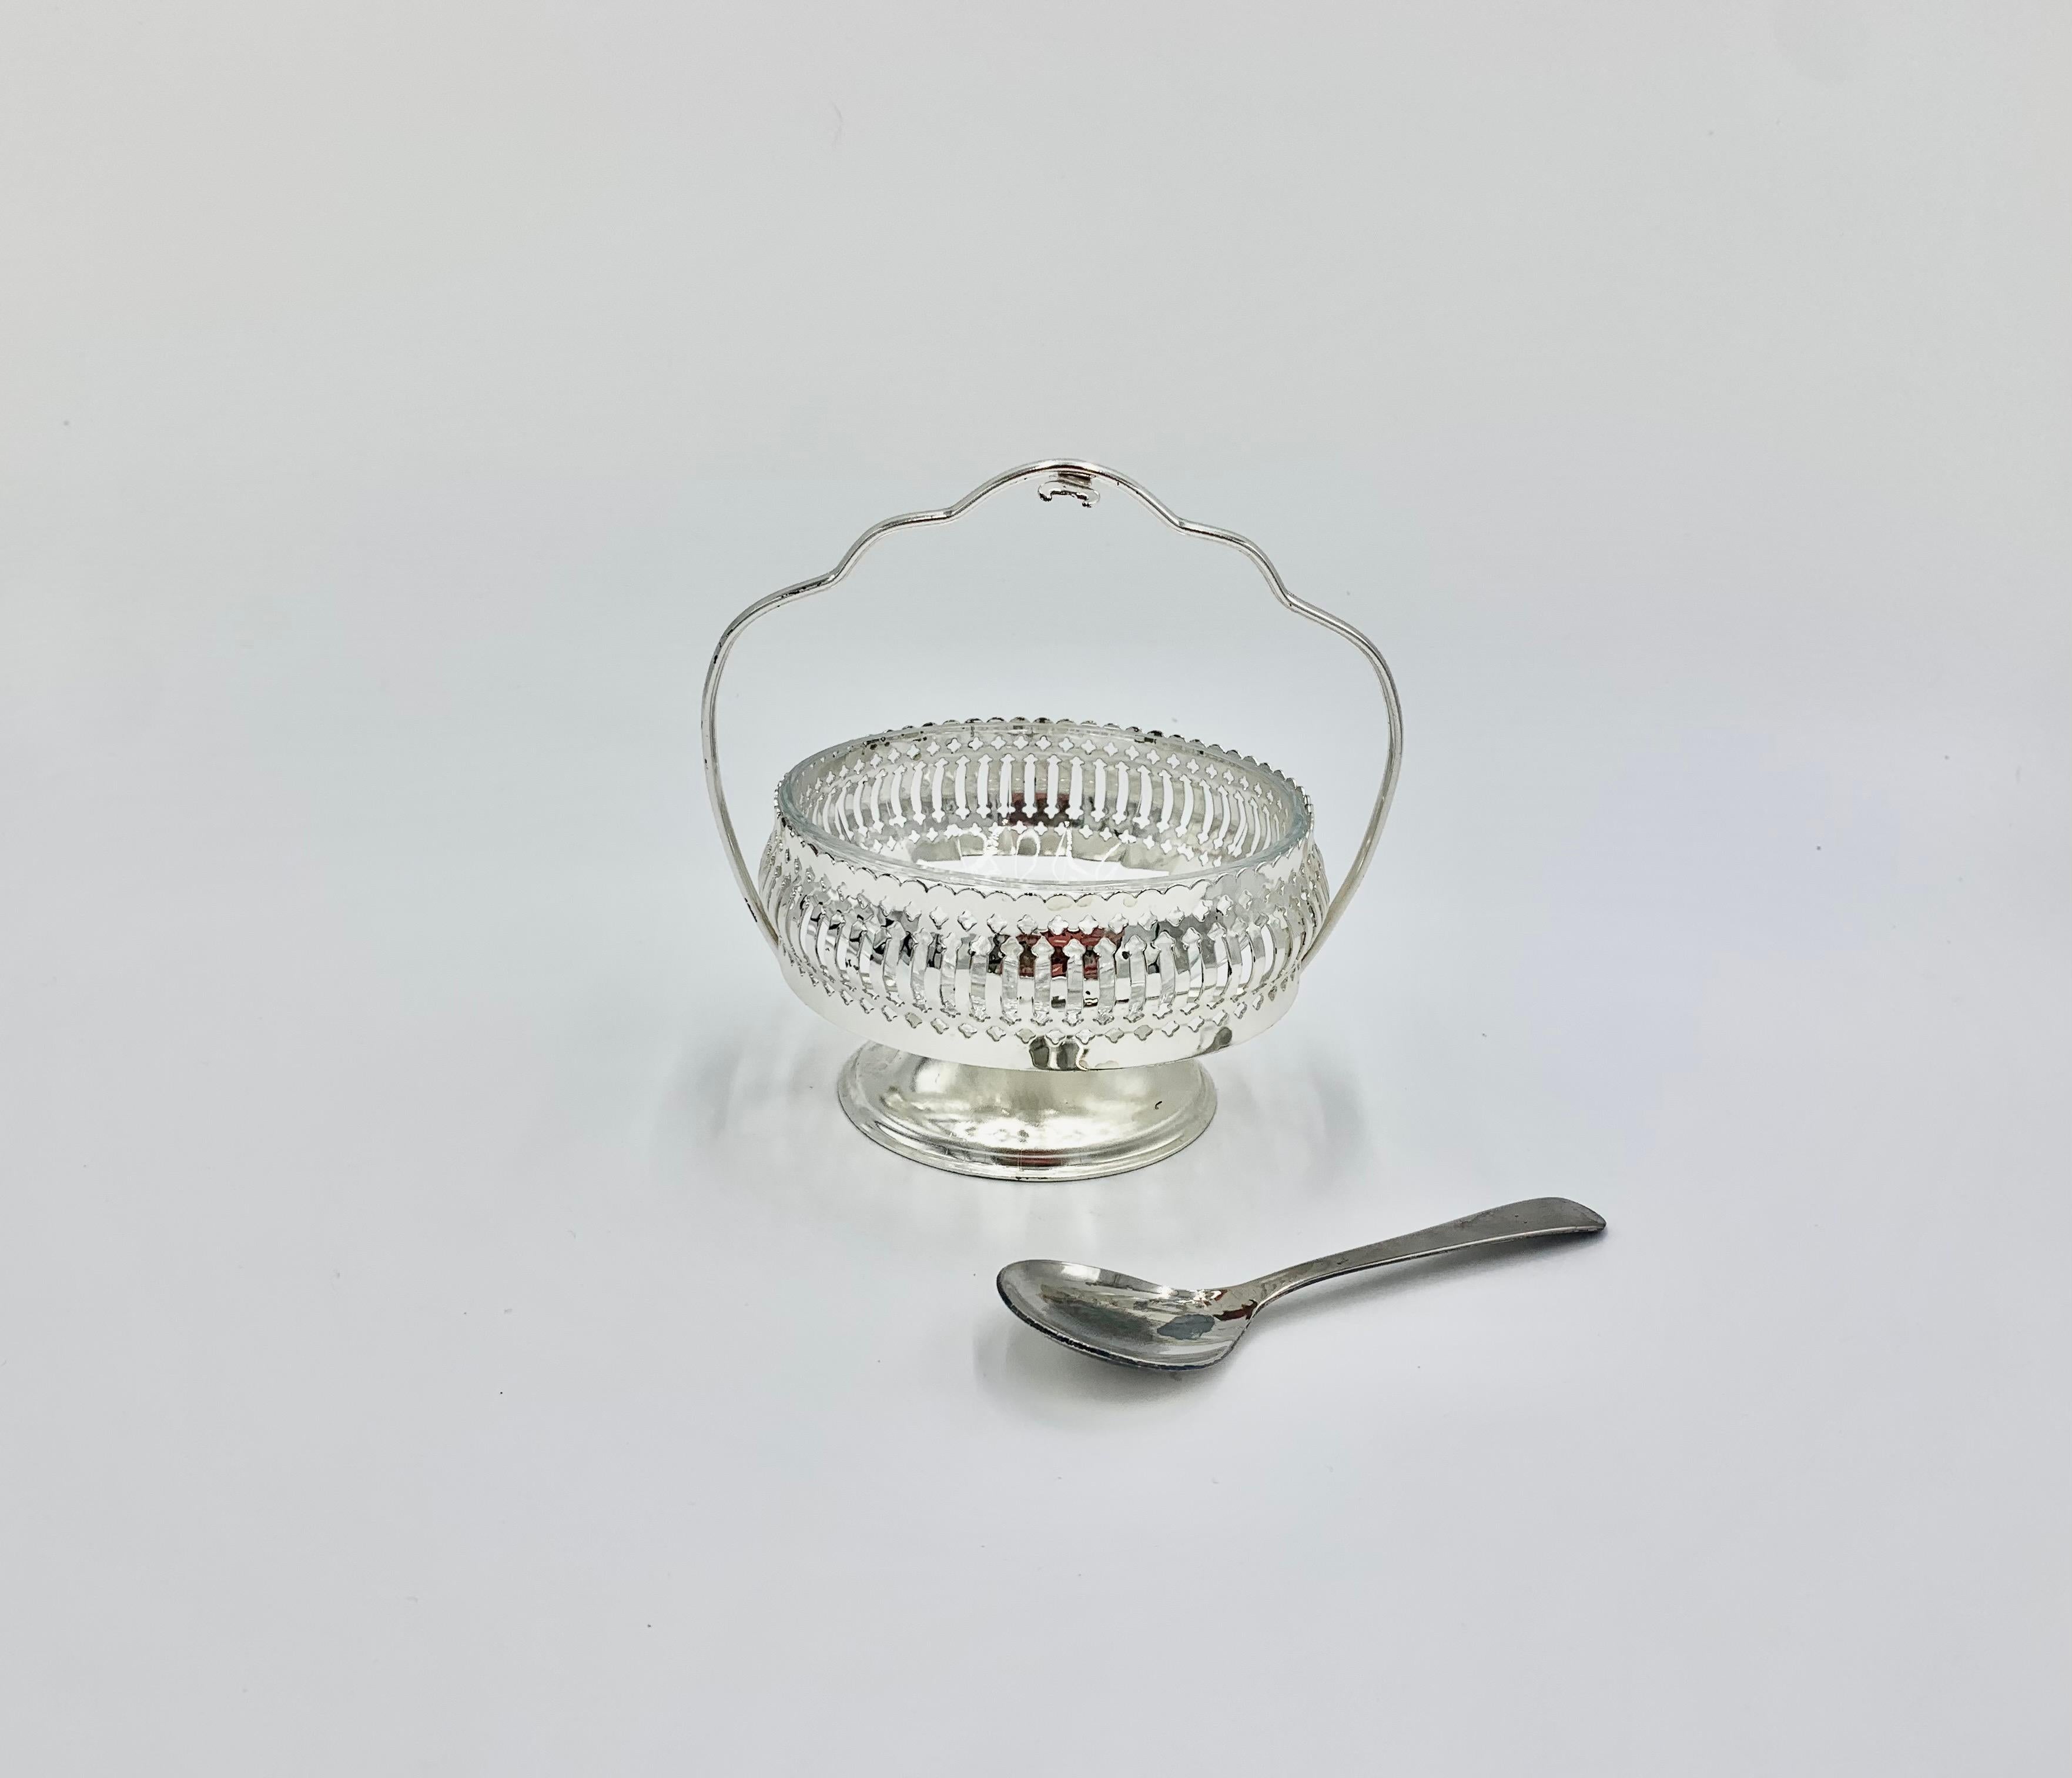 Mayell silver plated spice / sugar bowl. Sugar bowl with spoon holder and glass insert. A spoon is included. Very good condition :

Measure: height 14 cm / diameter 11 cm.